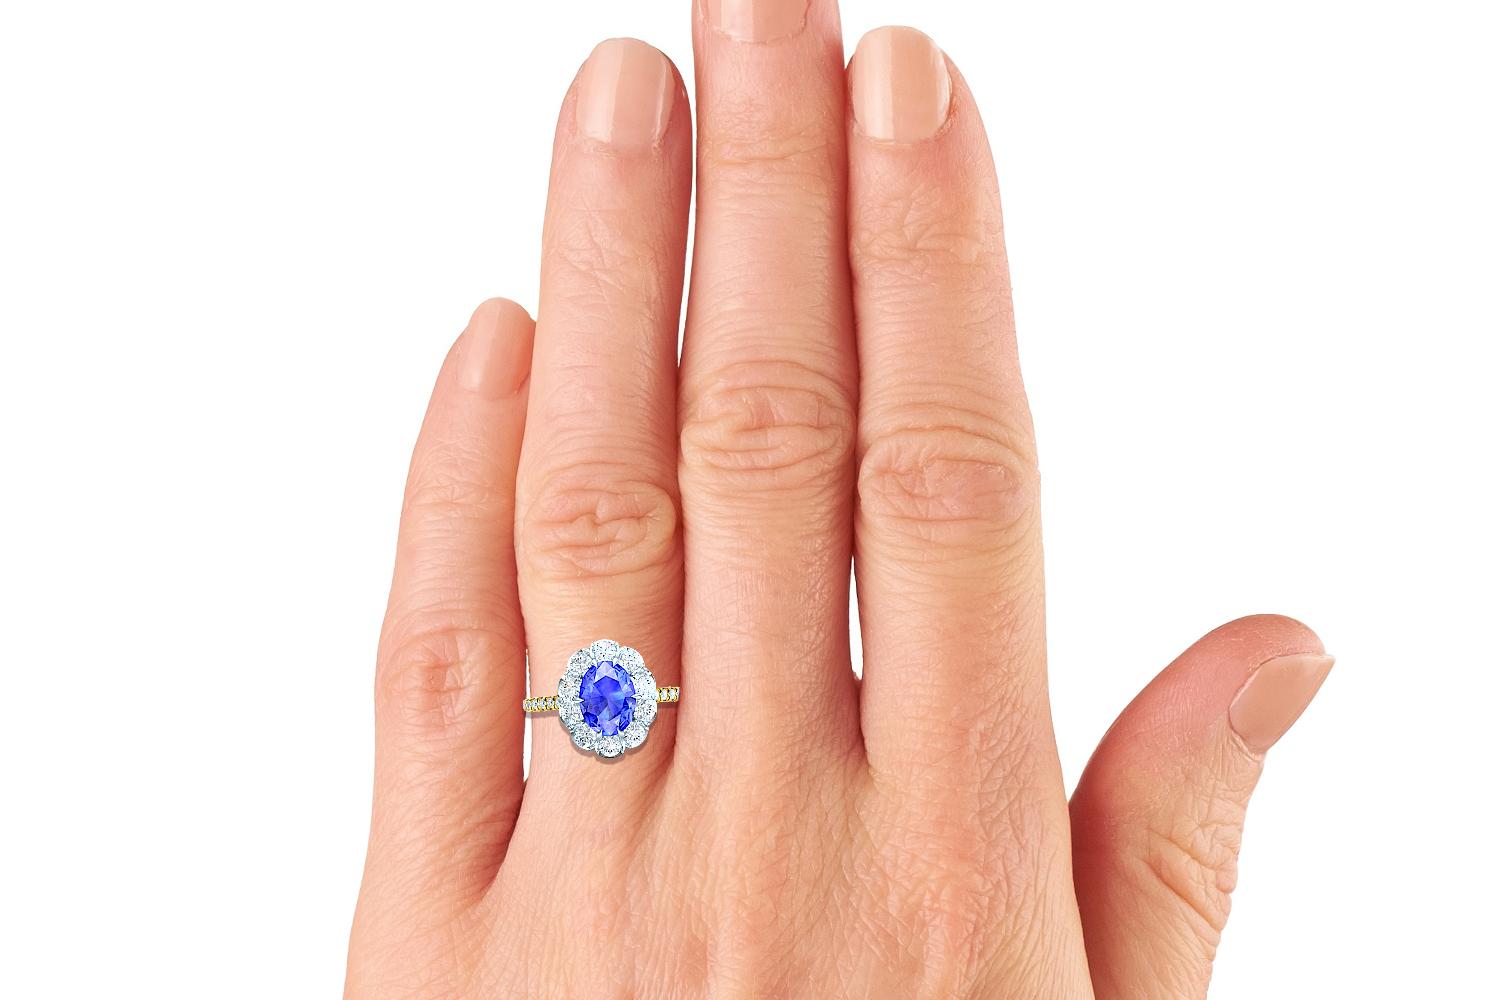 Not much goes better than the combination of blue sapphire and white diamond.  This simple but beautiful sapphire and diamond ring contains the following.  The center stone is apprx. 1.10-1.20 carats and has a gorgeous cornflower blue color, typical